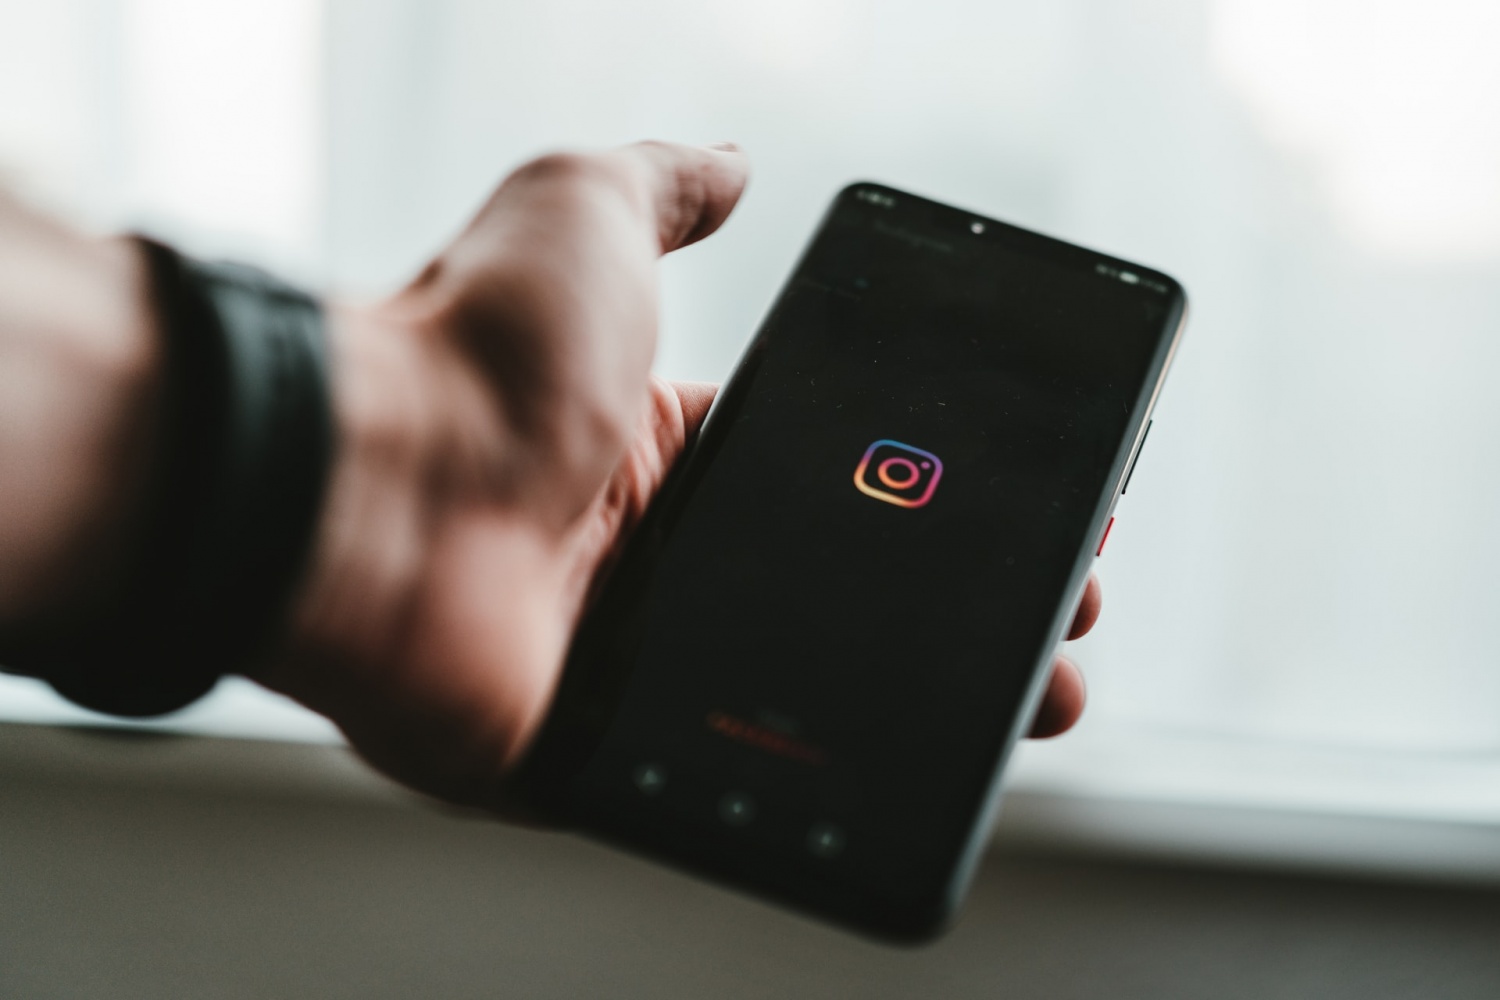 Instagram Not Working? 5 Ways to Fix App If Your Feed Is Not Refreshing